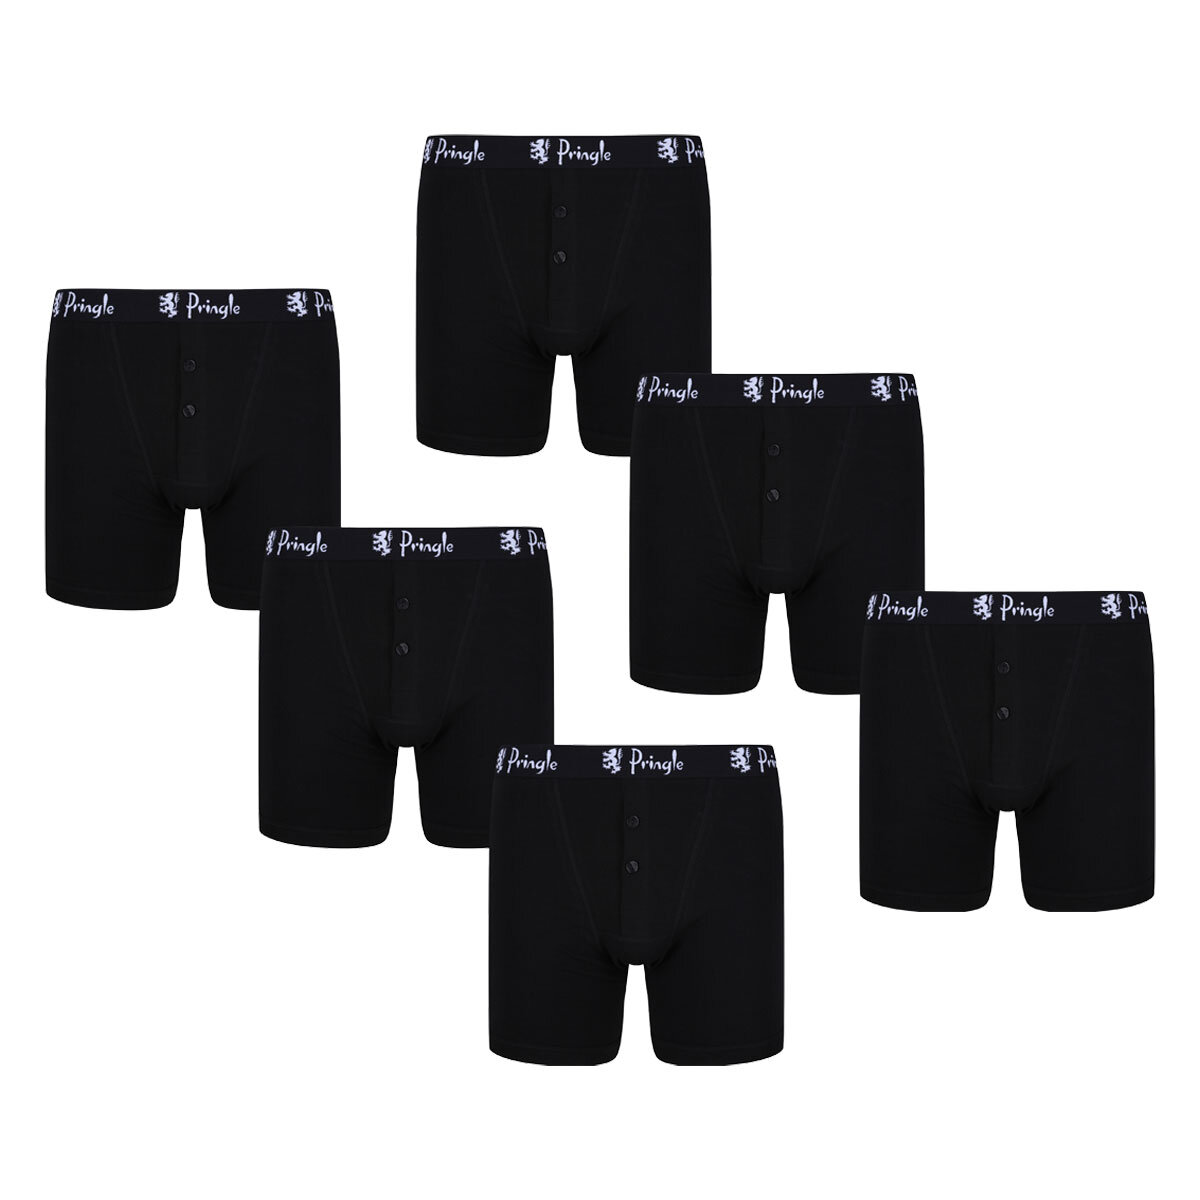 Pringle 2 x 3 Pack William Men's Button Boxer Shorts in B